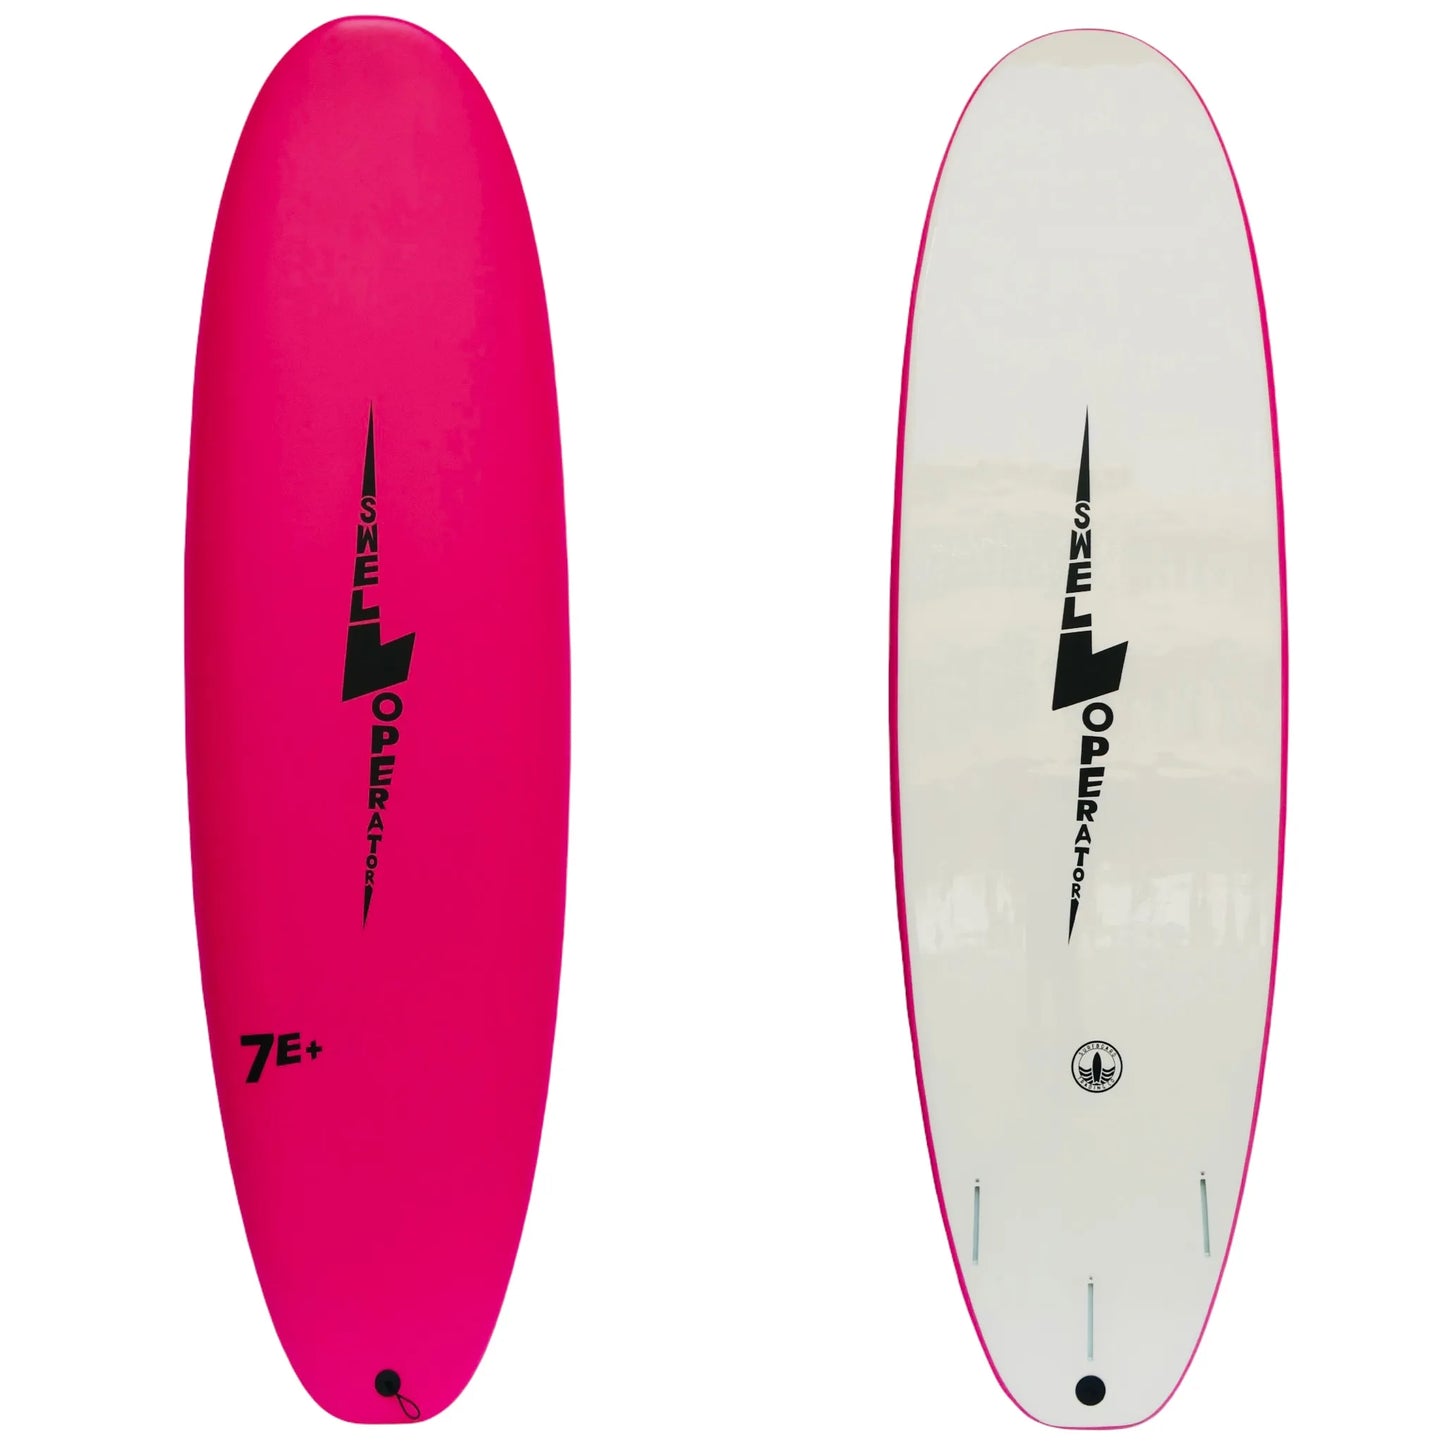 Surfboard Trading Company Swell Operator Soft Surfboards Softboard 7' Coral Pink